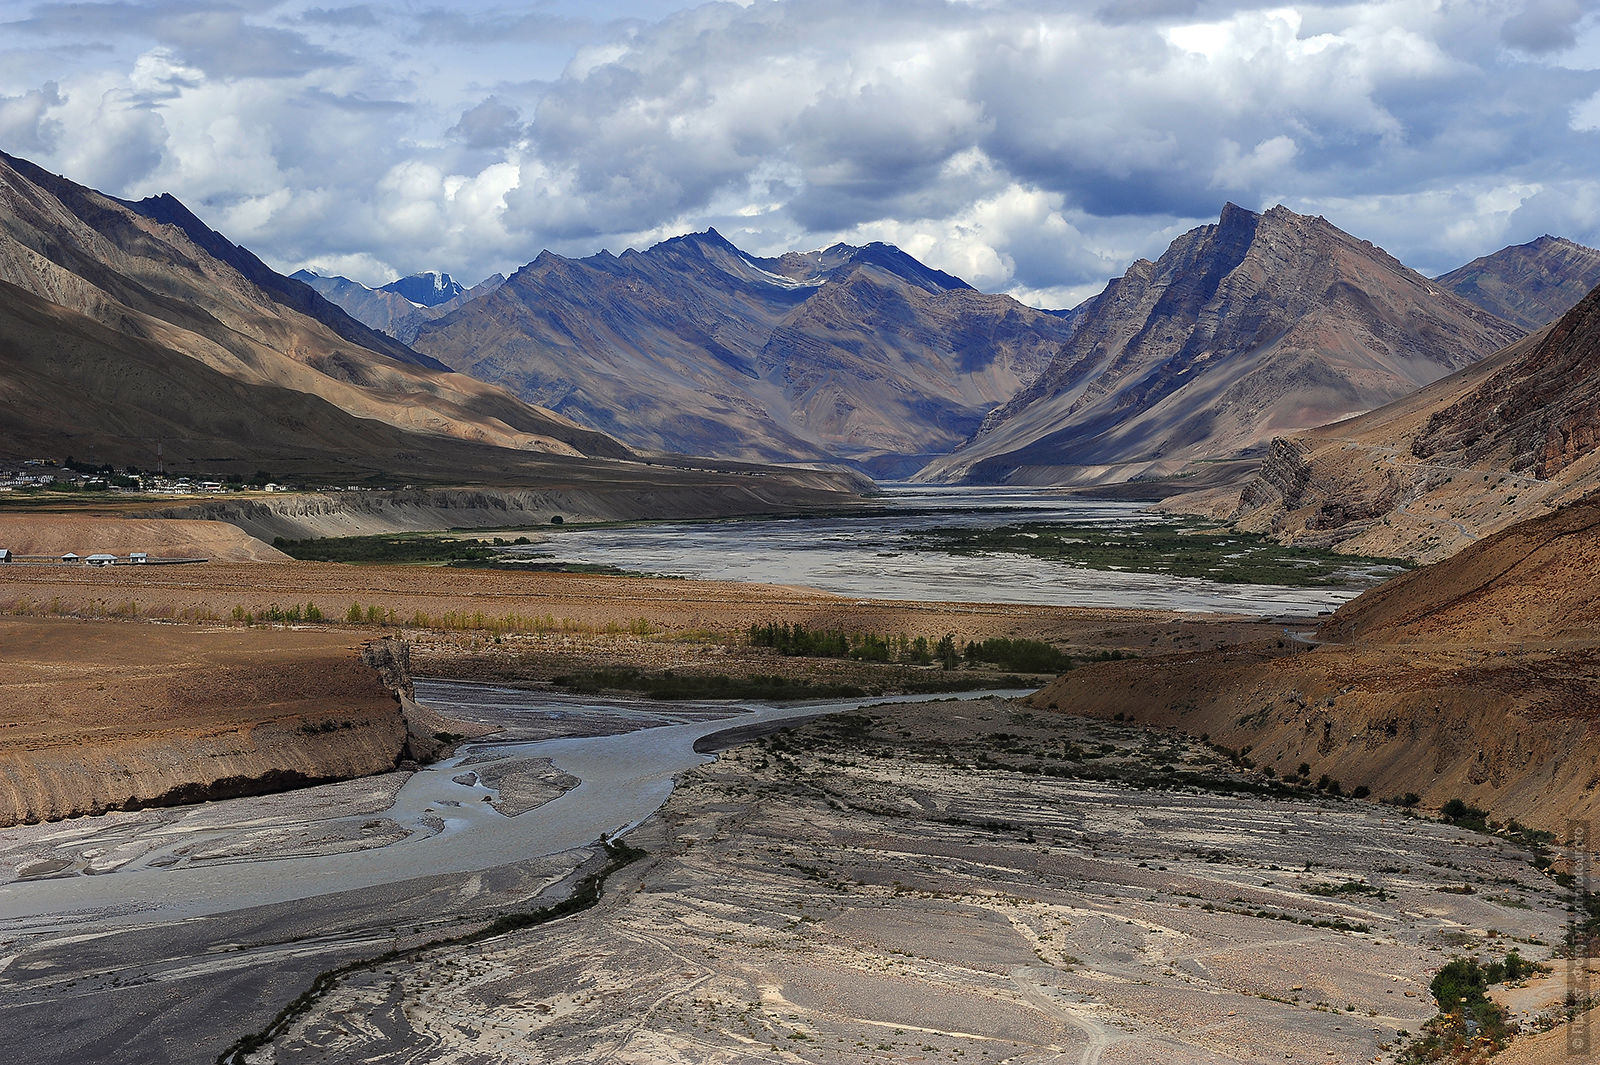 The landscape of Spiti valley from the village Cosa. Photo Tour of the valley of Spiti, Little Tibet, August 2017.